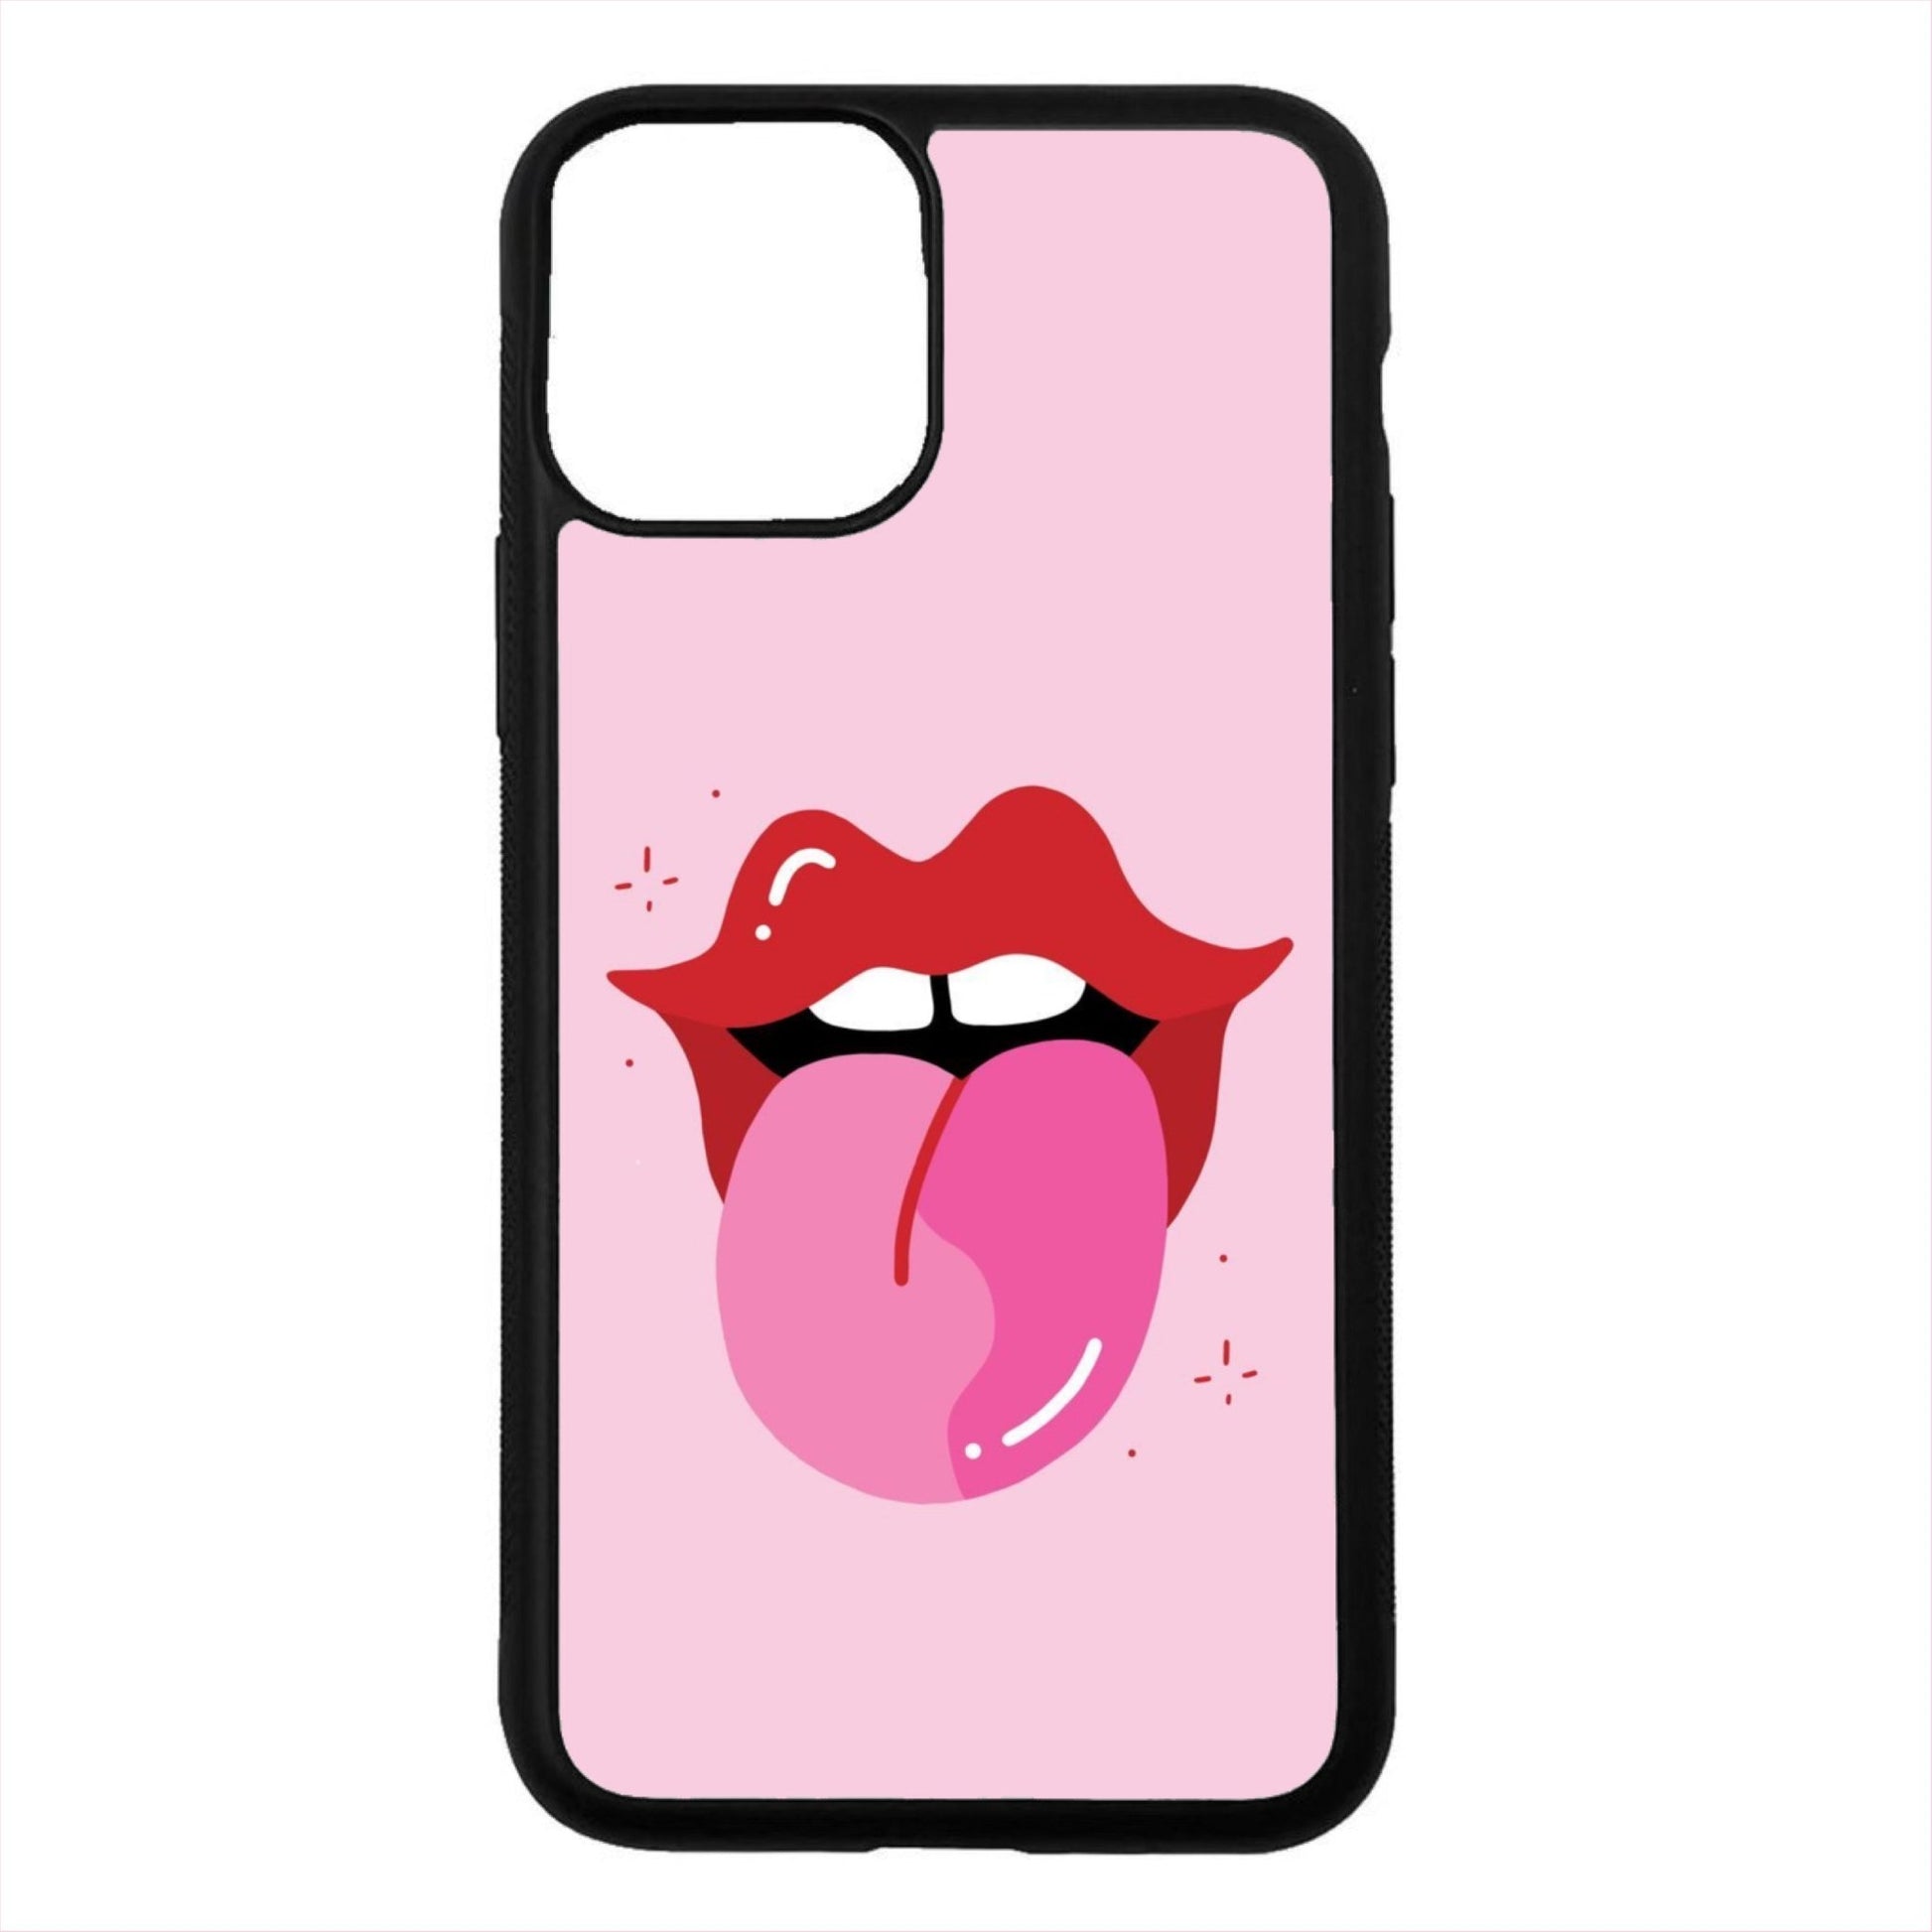 tongue's out - MAI CASES